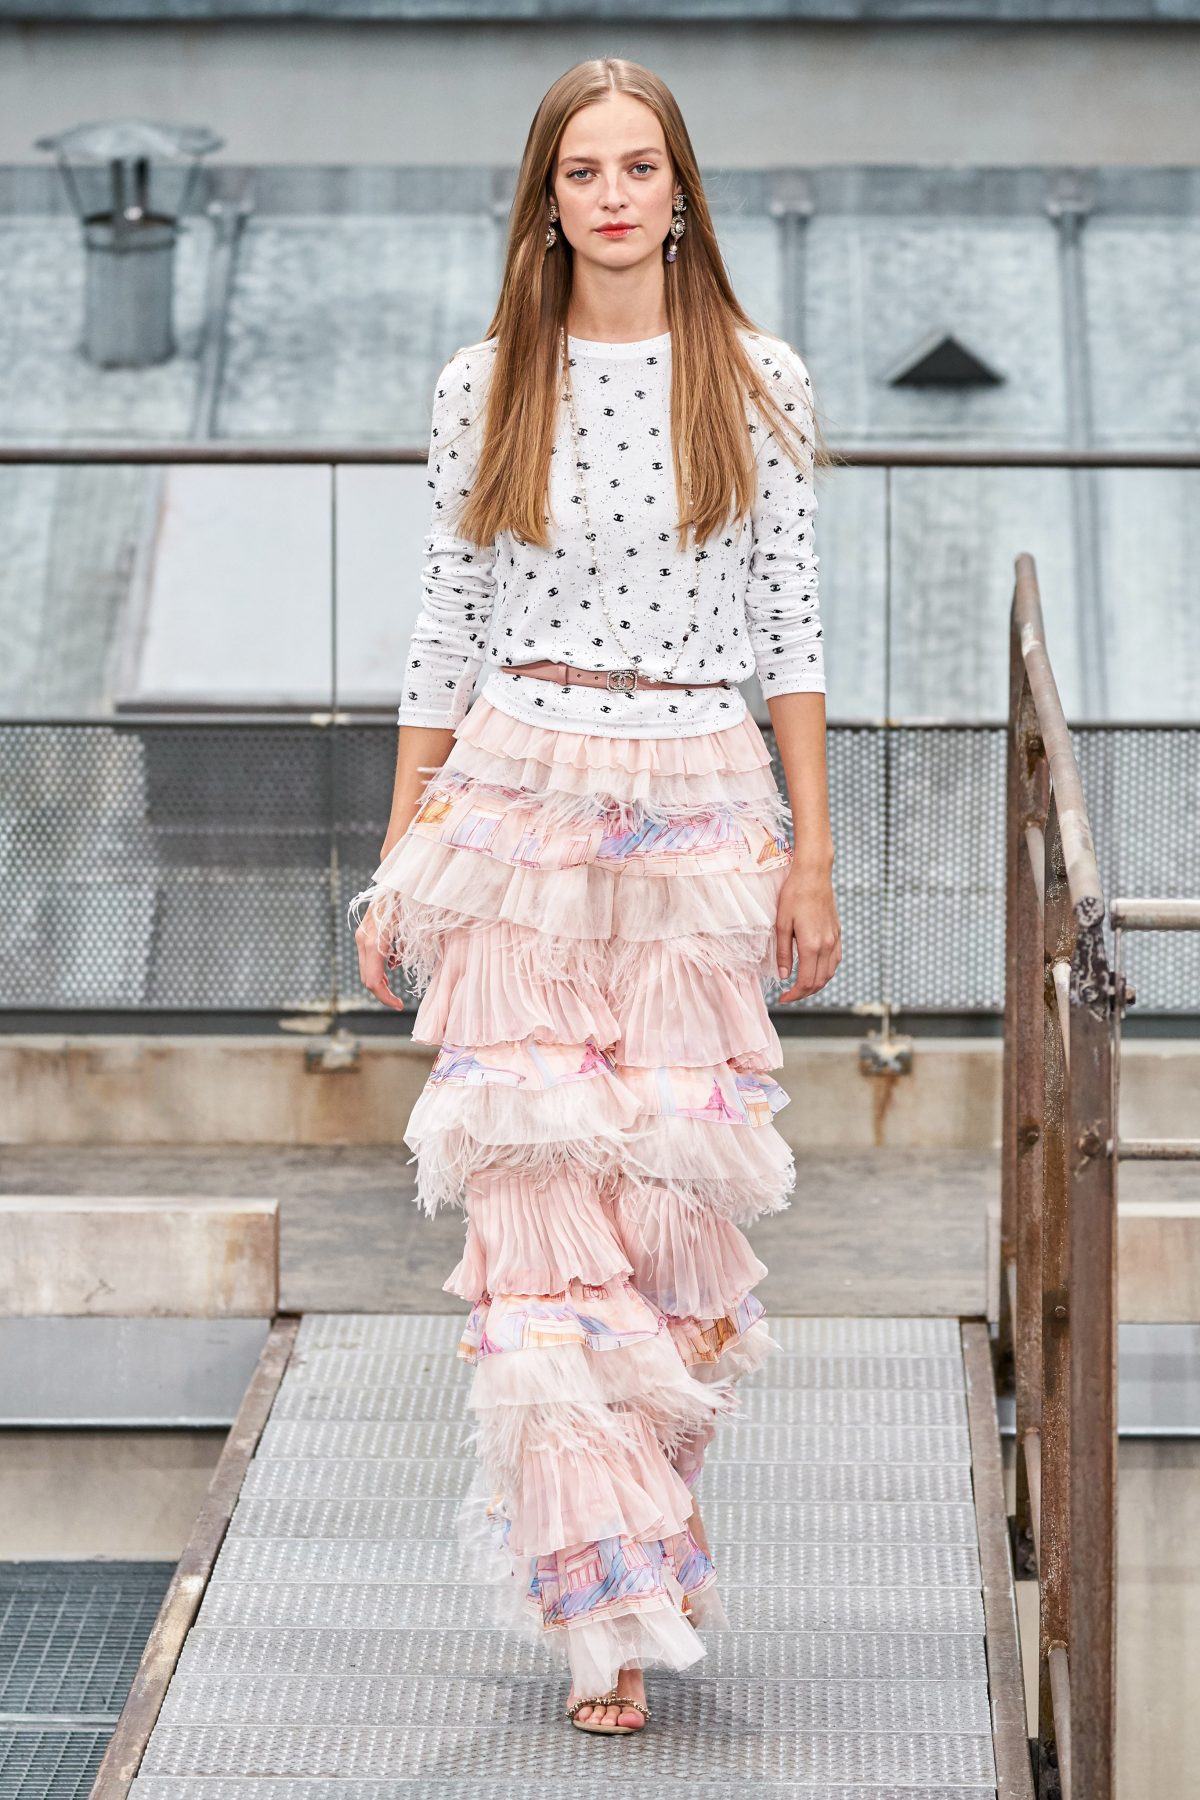 Chanel Ready-to-Wear Show Review